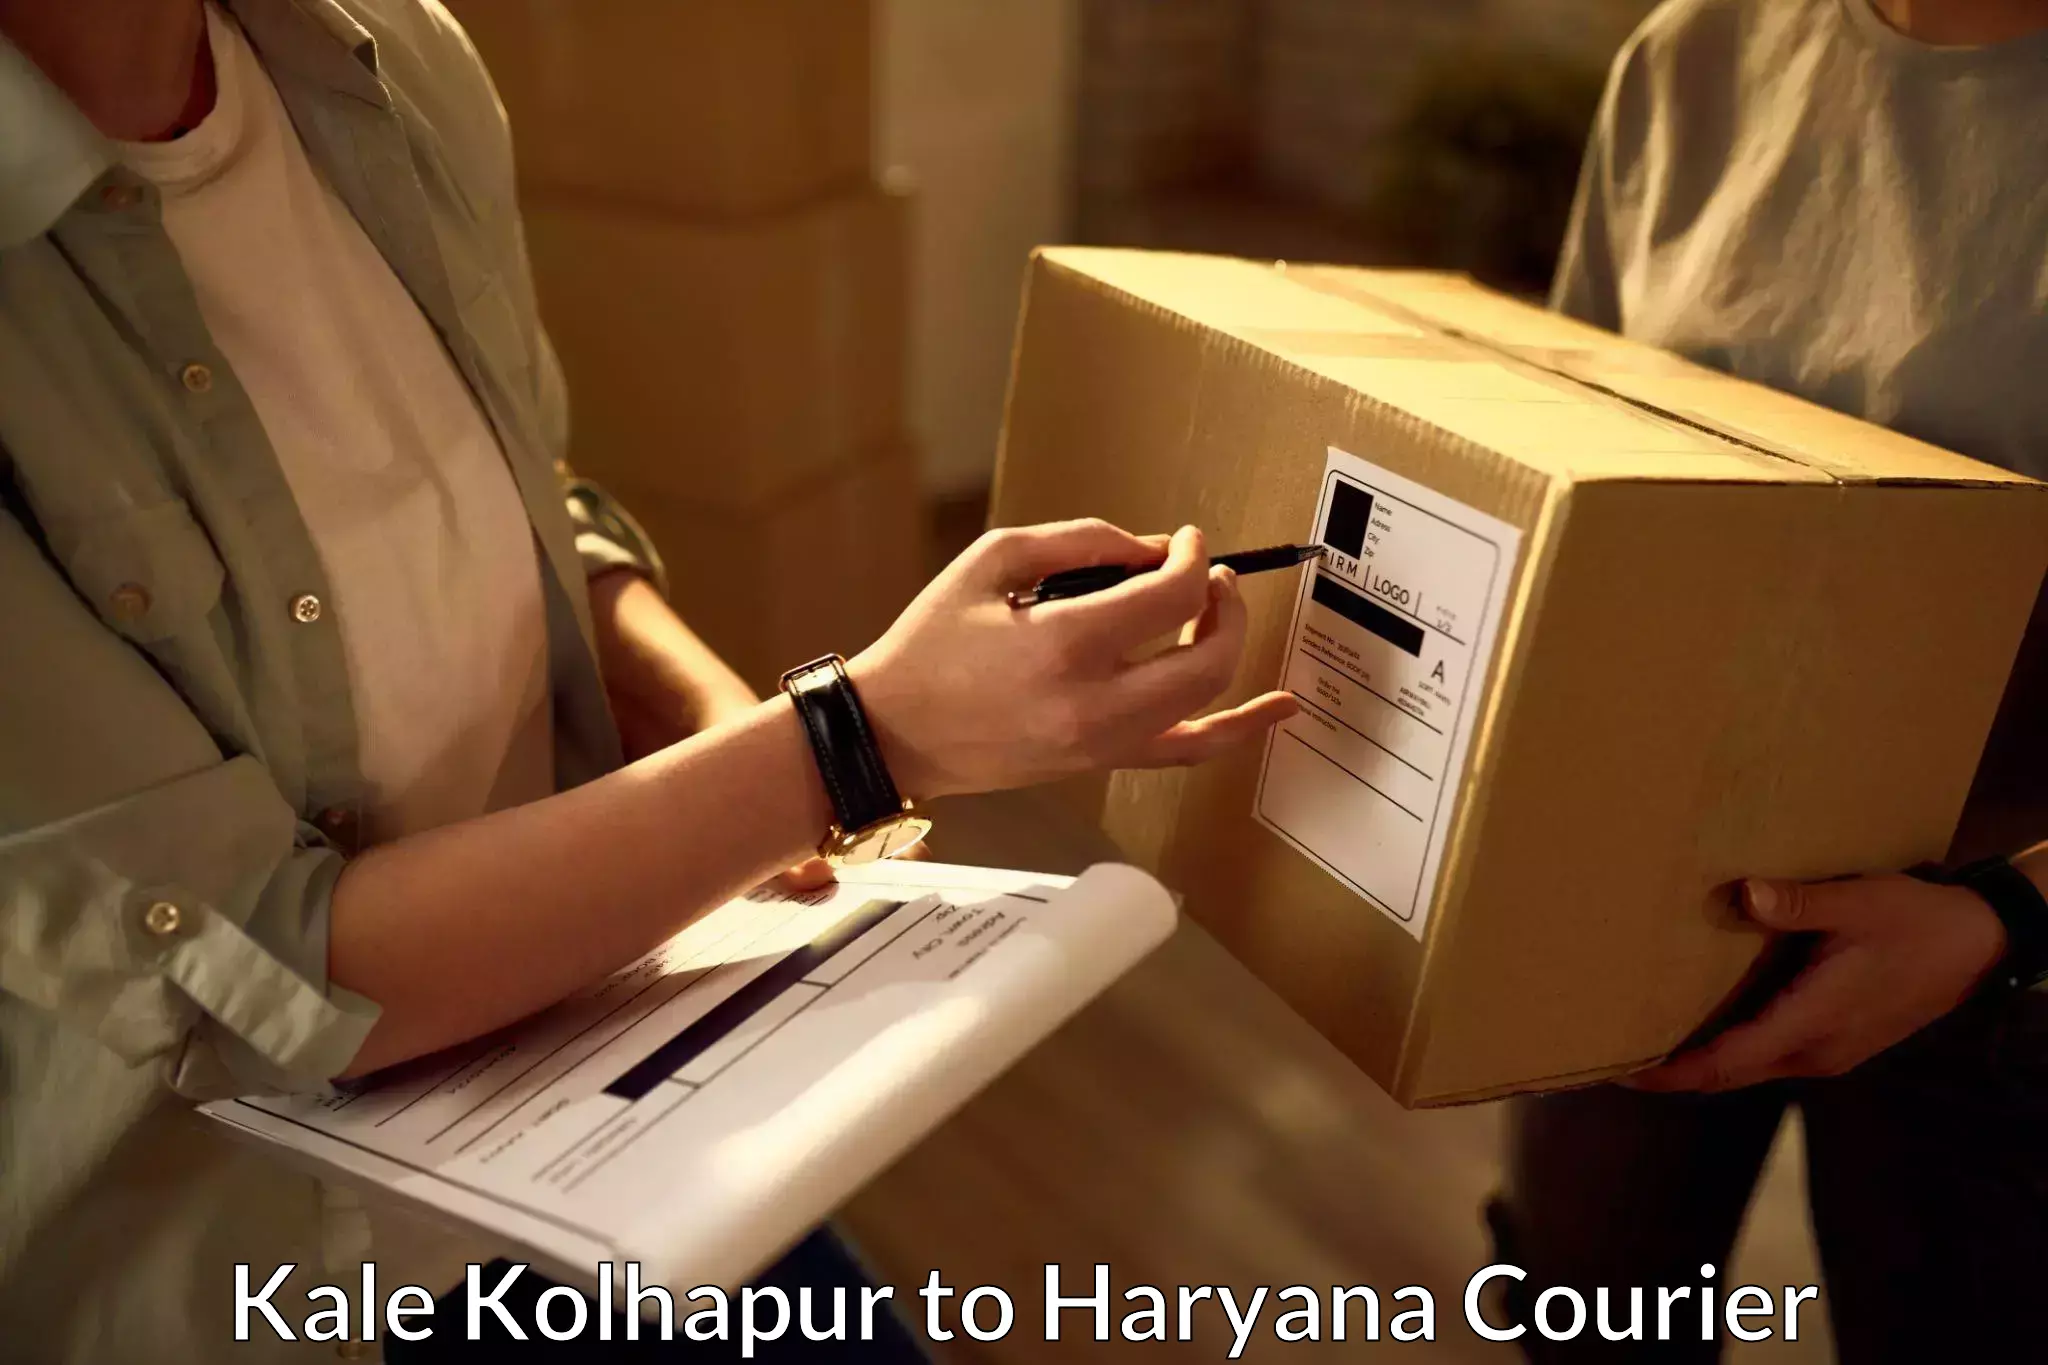 Global courier networks Kale Kolhapur to Assandh